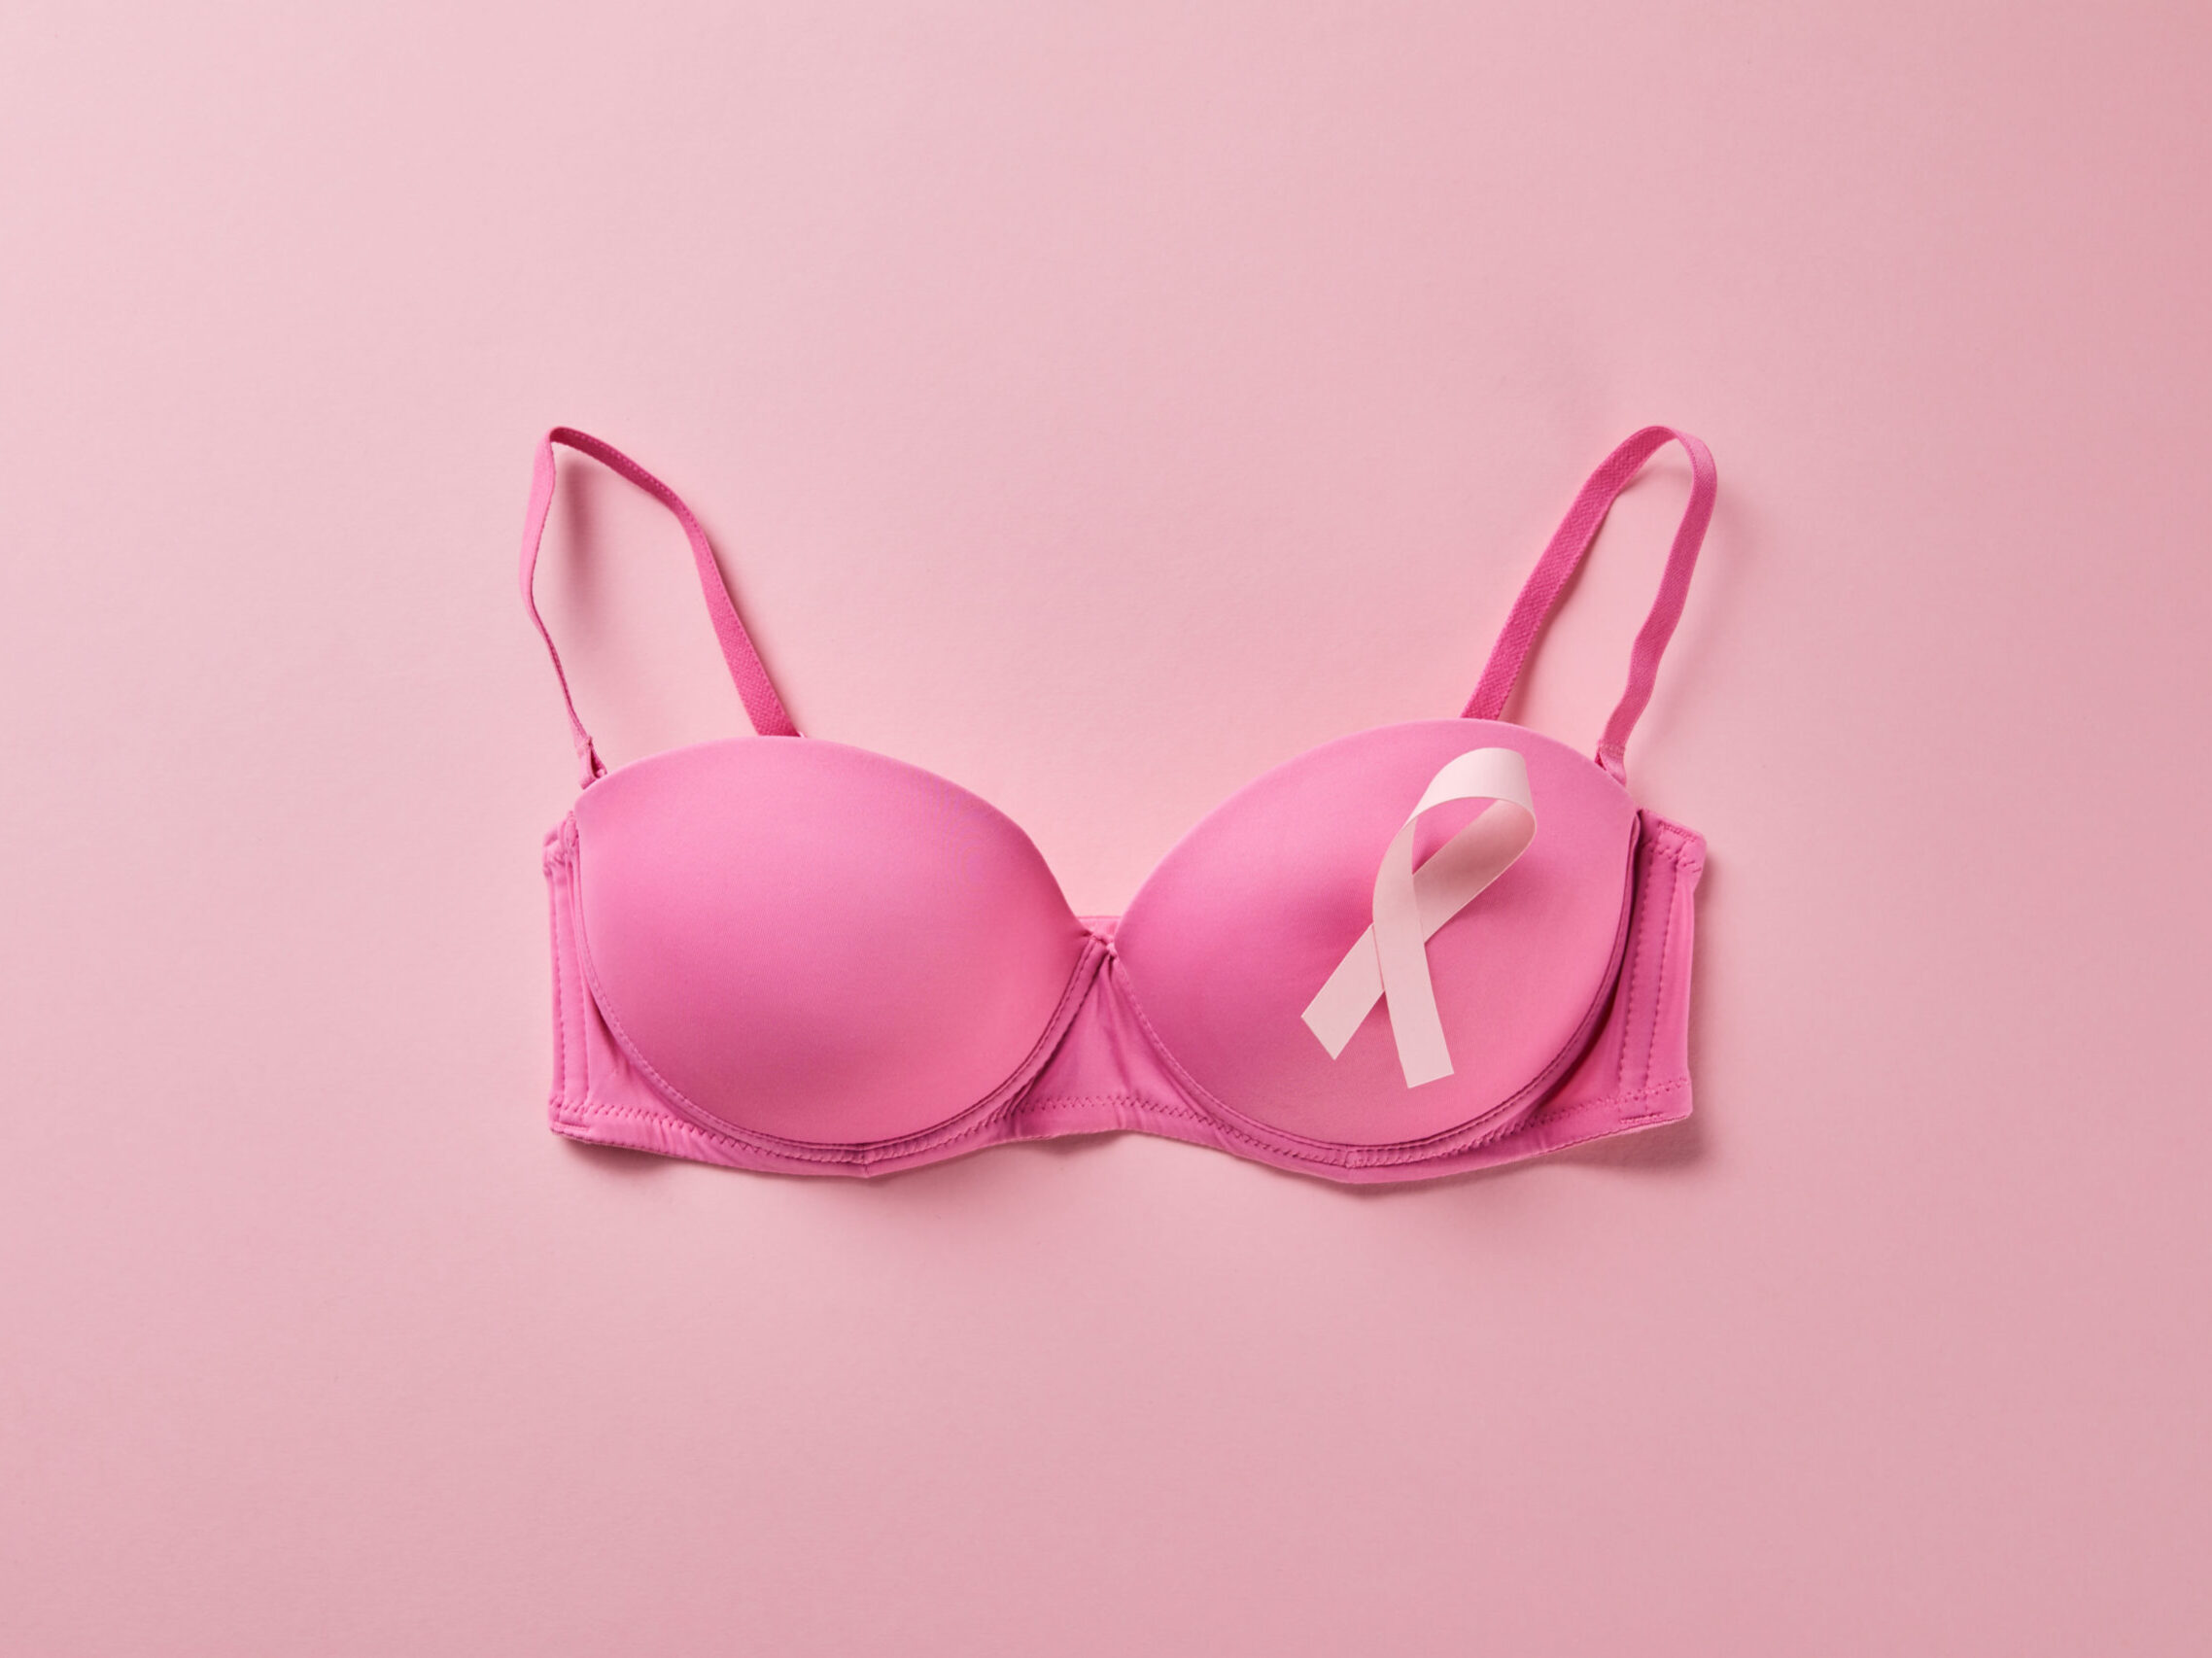 Feeling Pretty: New Additions to Mastectomy Lingerie Line - Pretty